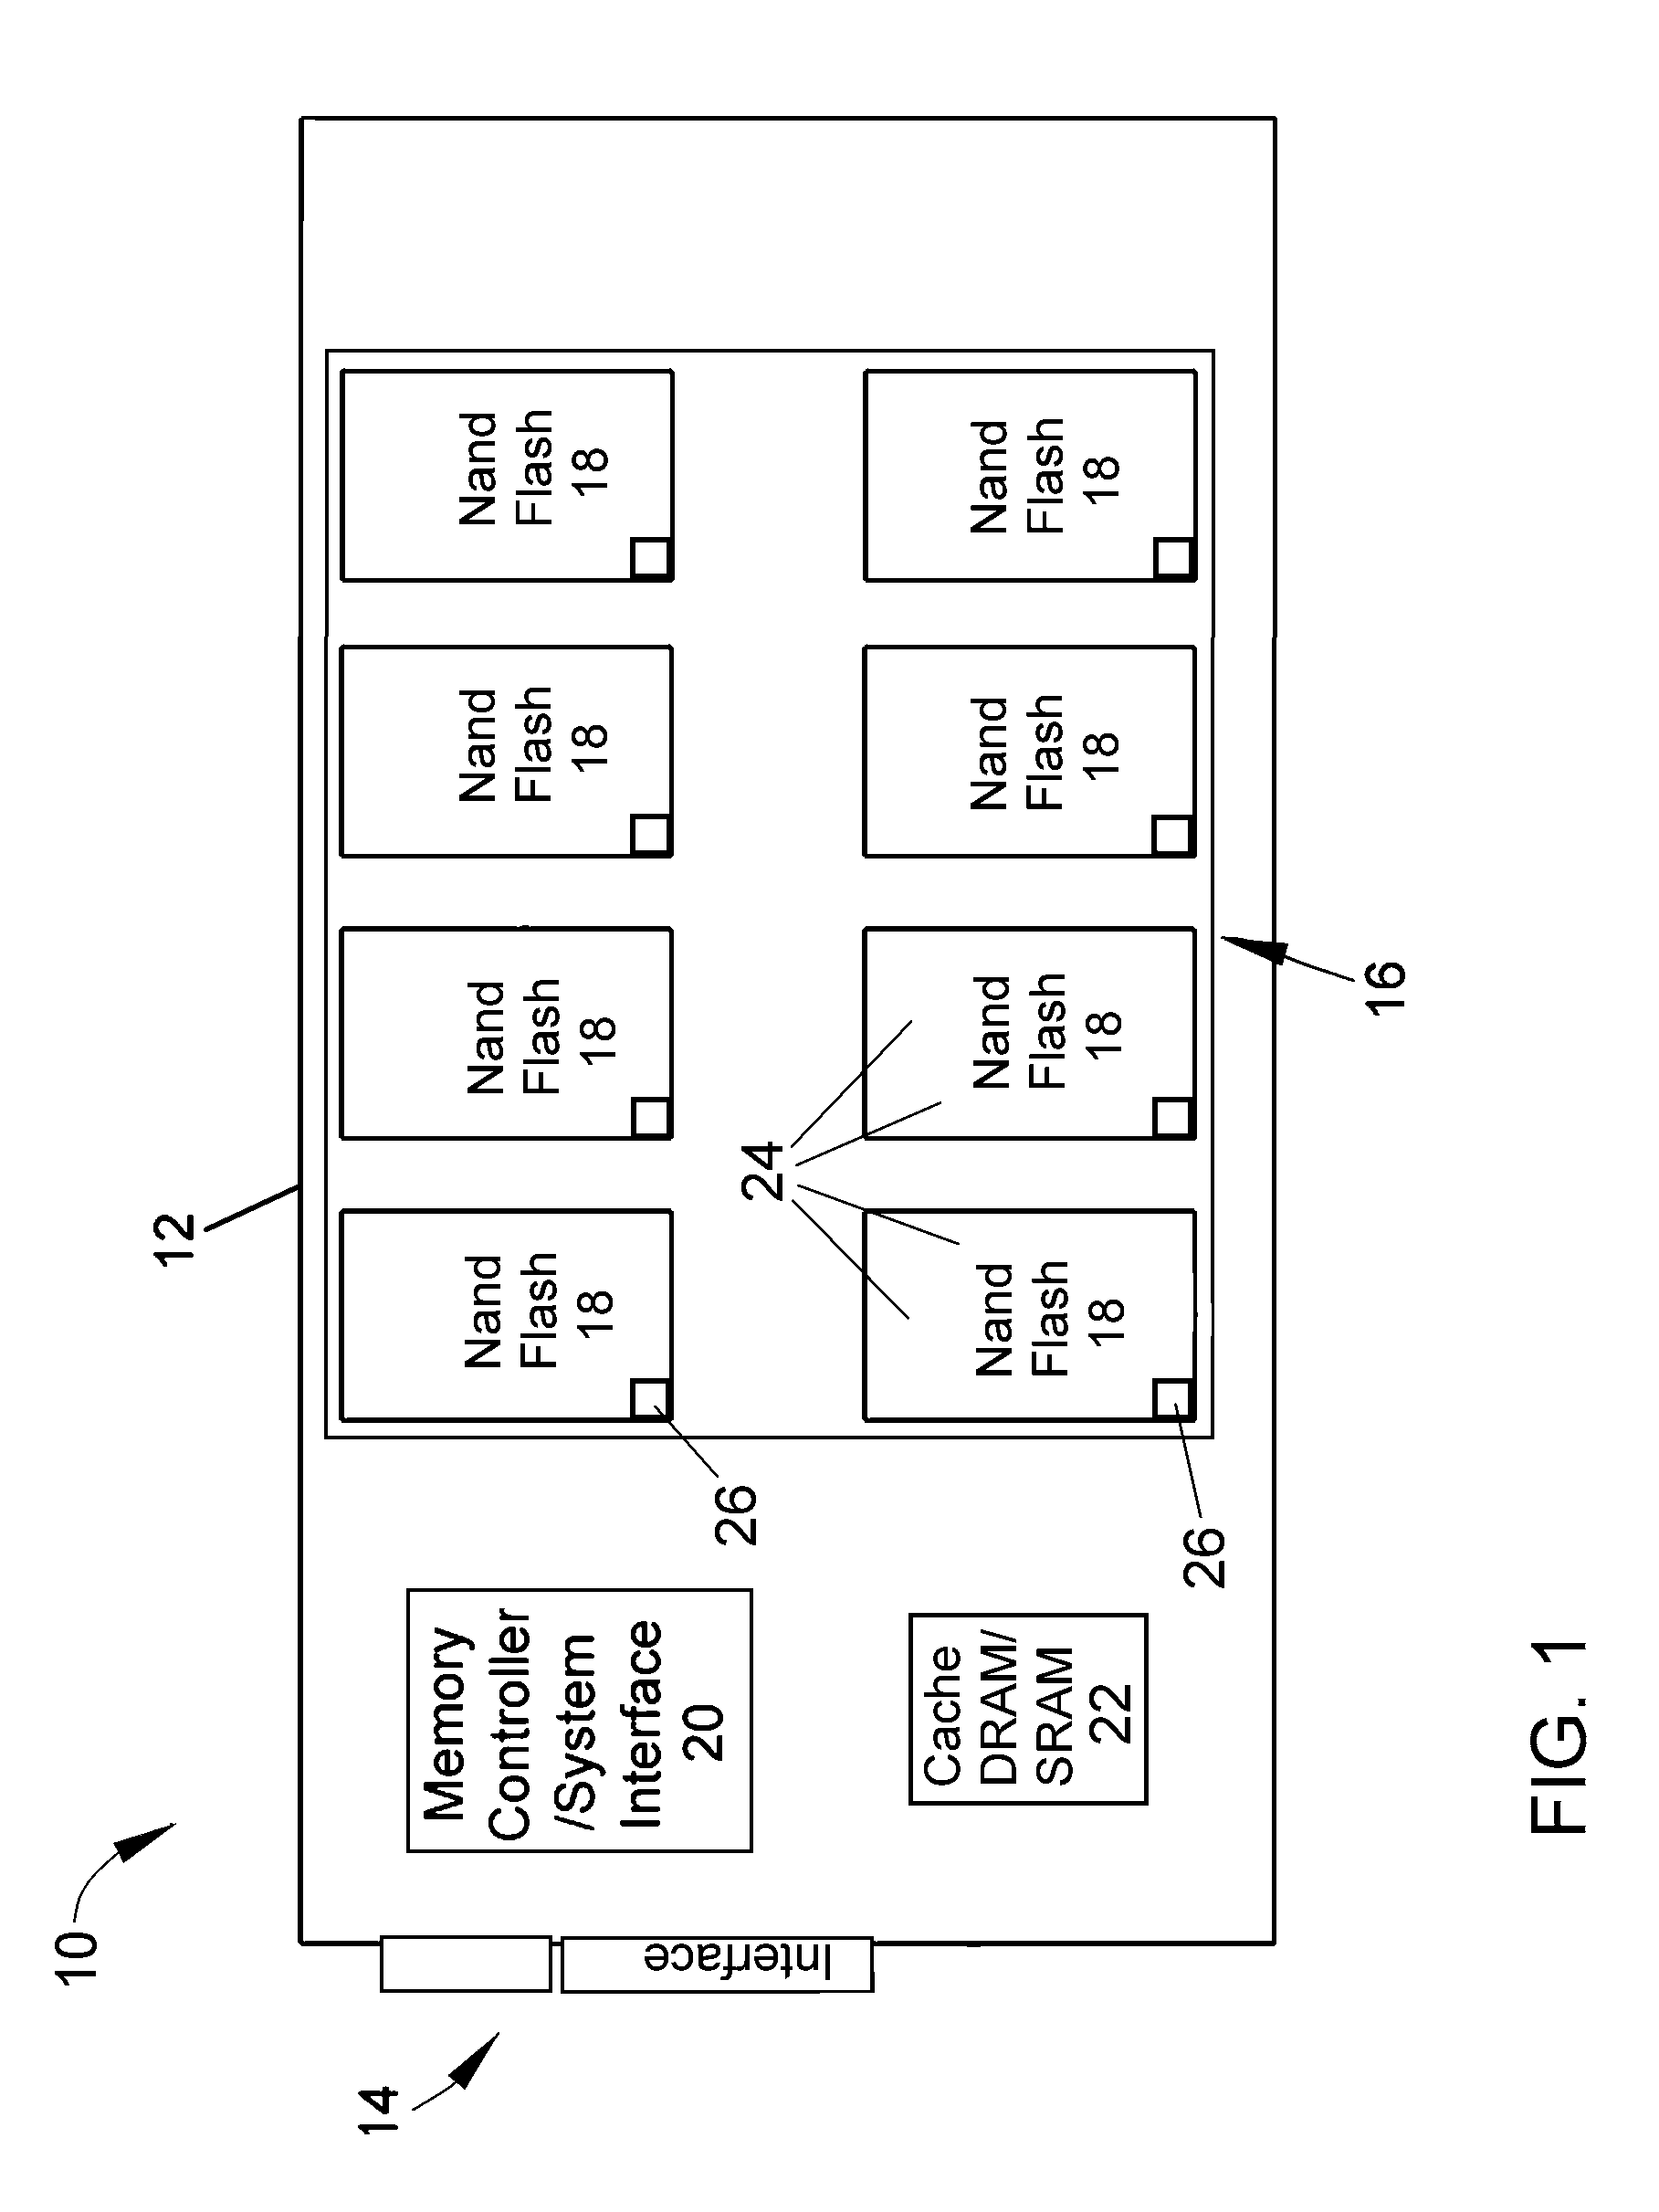 Solid-state mass storage device and method for failure anticipation